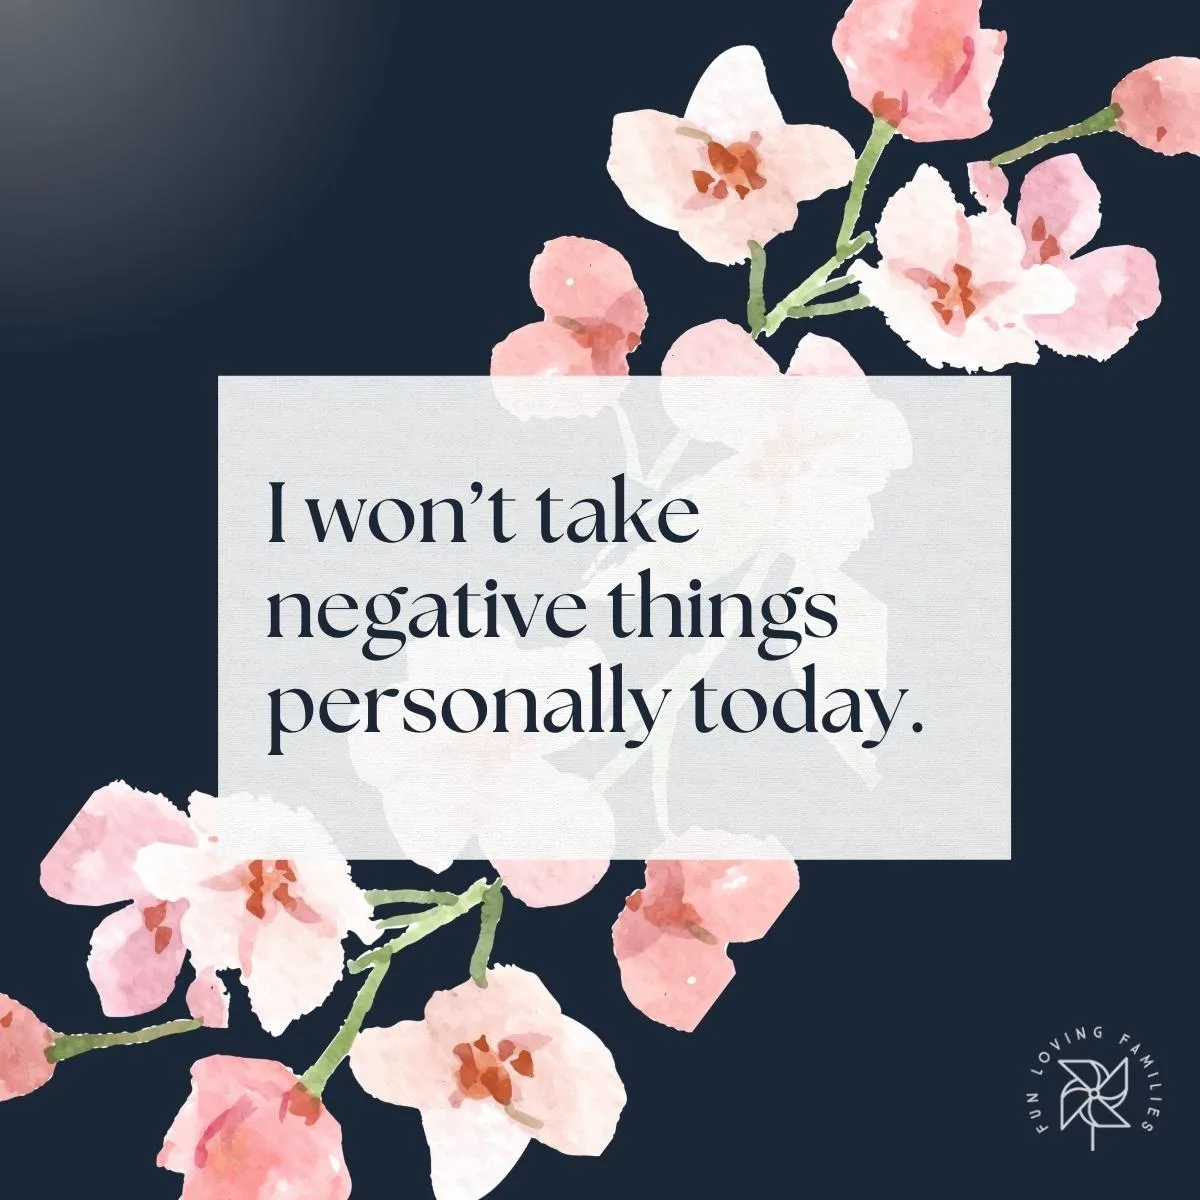 I won’t take negative things personally today affirmation